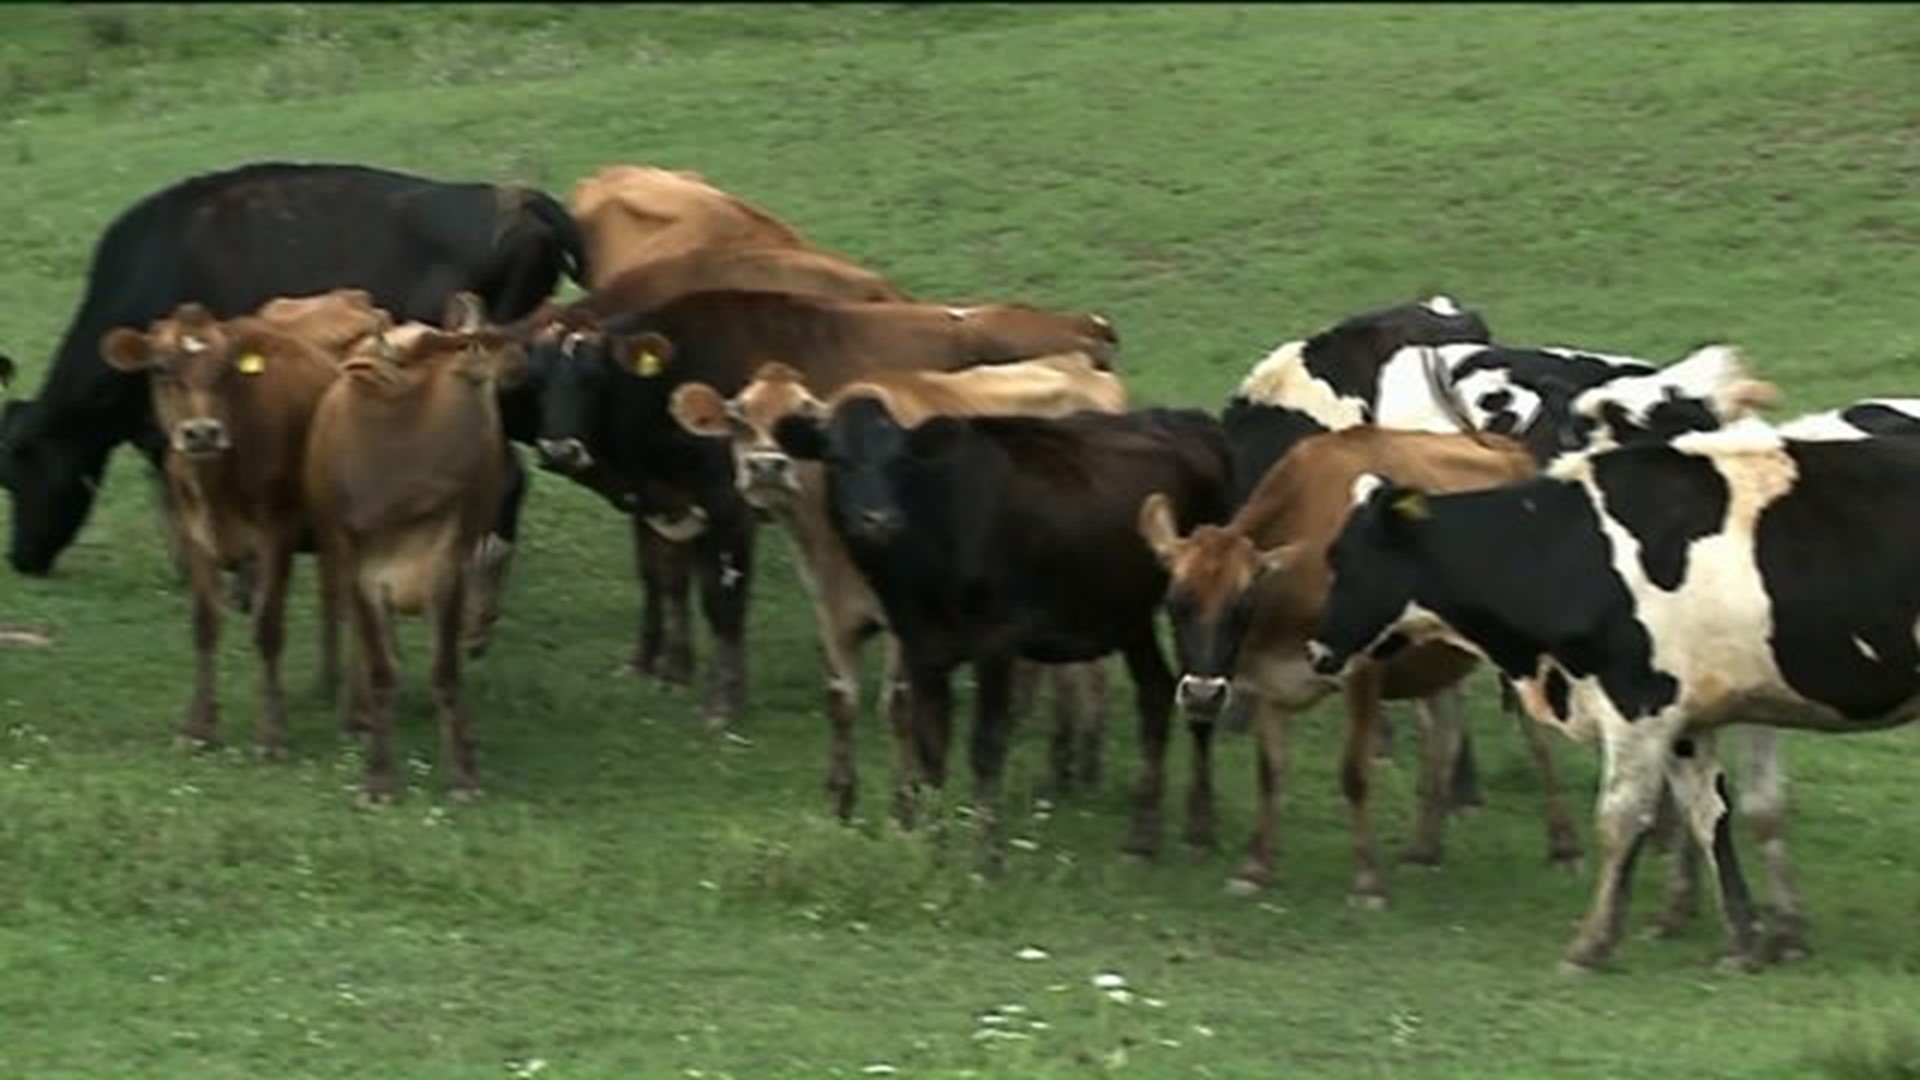 Wham Cam: Is Cow Tipping a Thing?